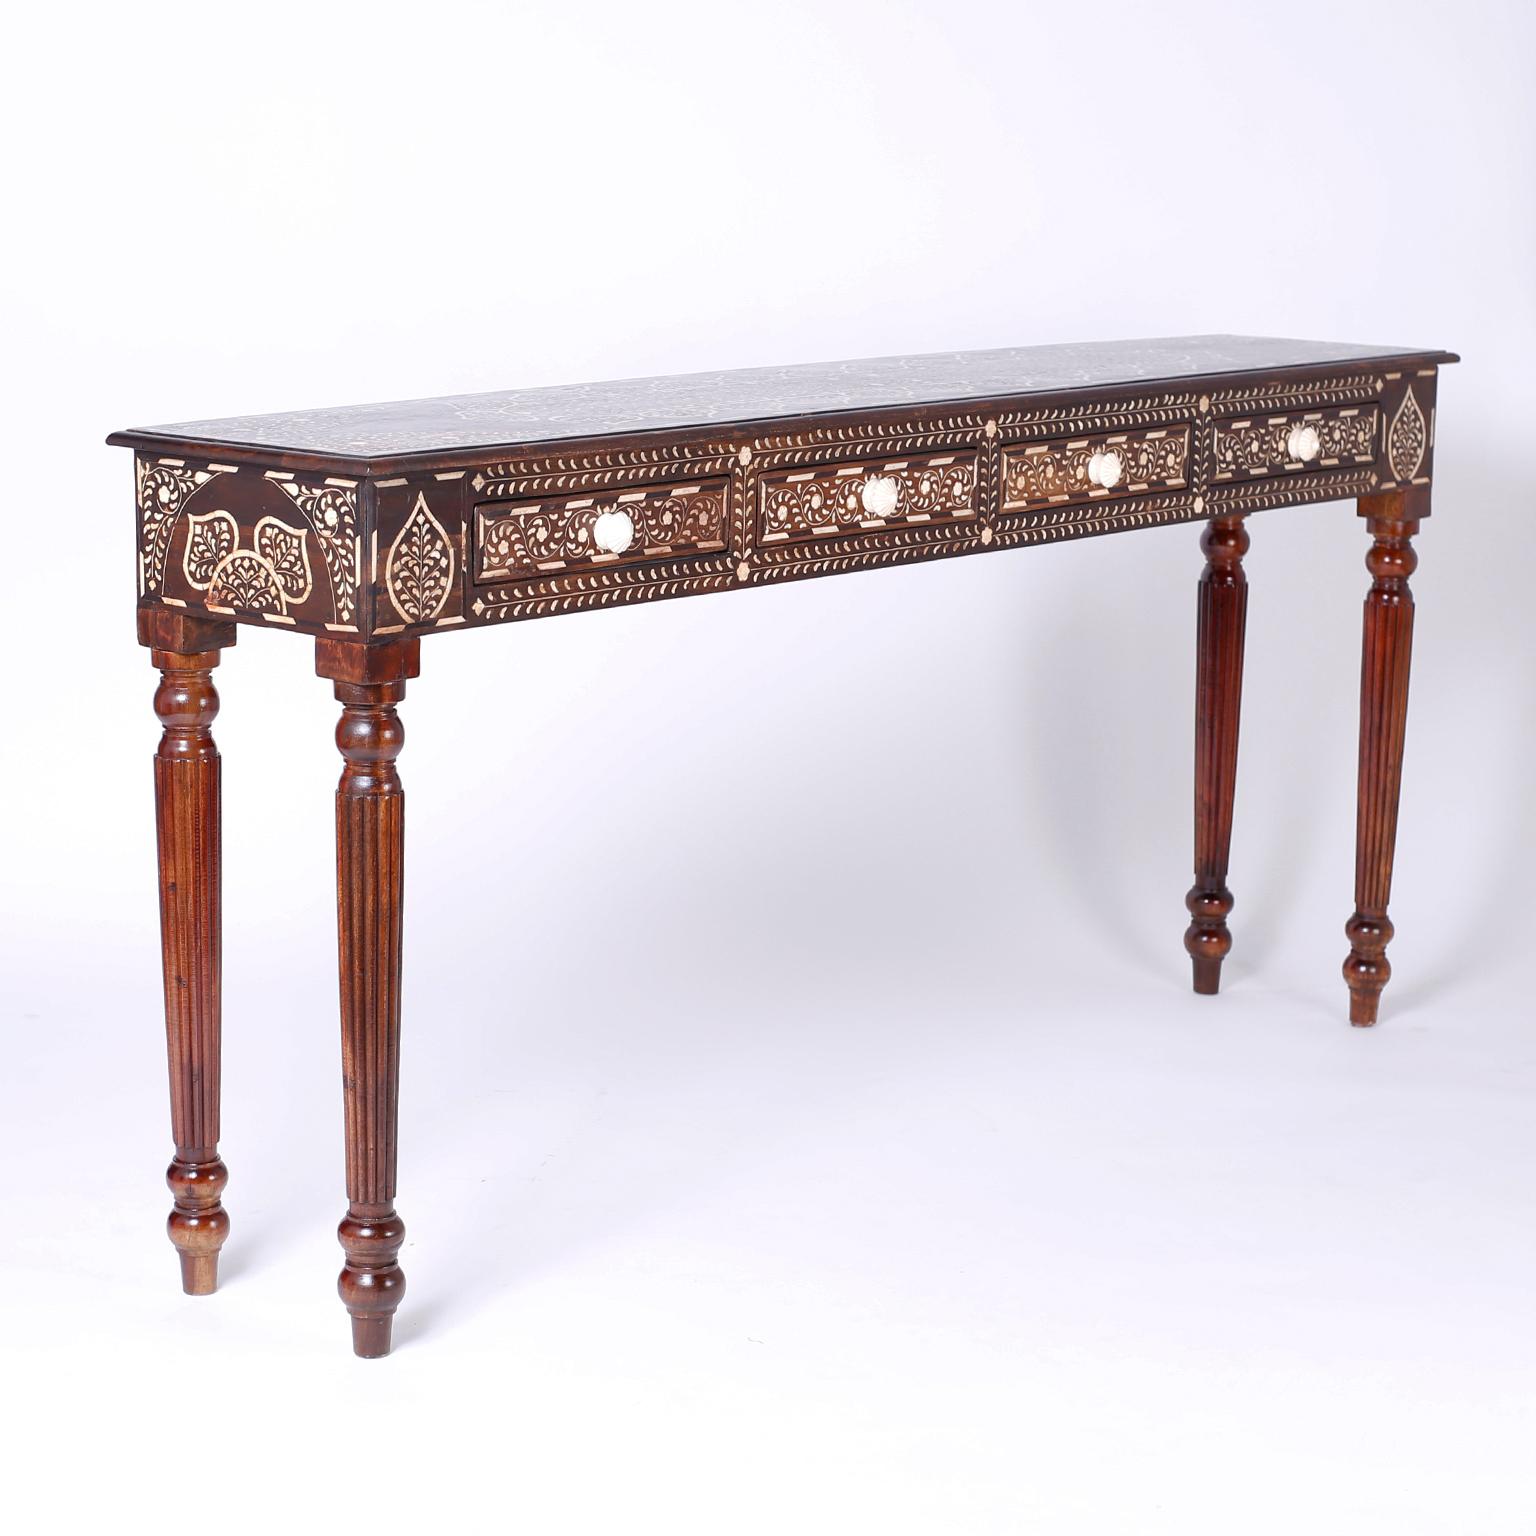 Long and lean Anglo-Indian four-drawer console table crafted in mahogany with exotic floral bone inlays. Featuring a desirable slim profile and fluted and turned legs.